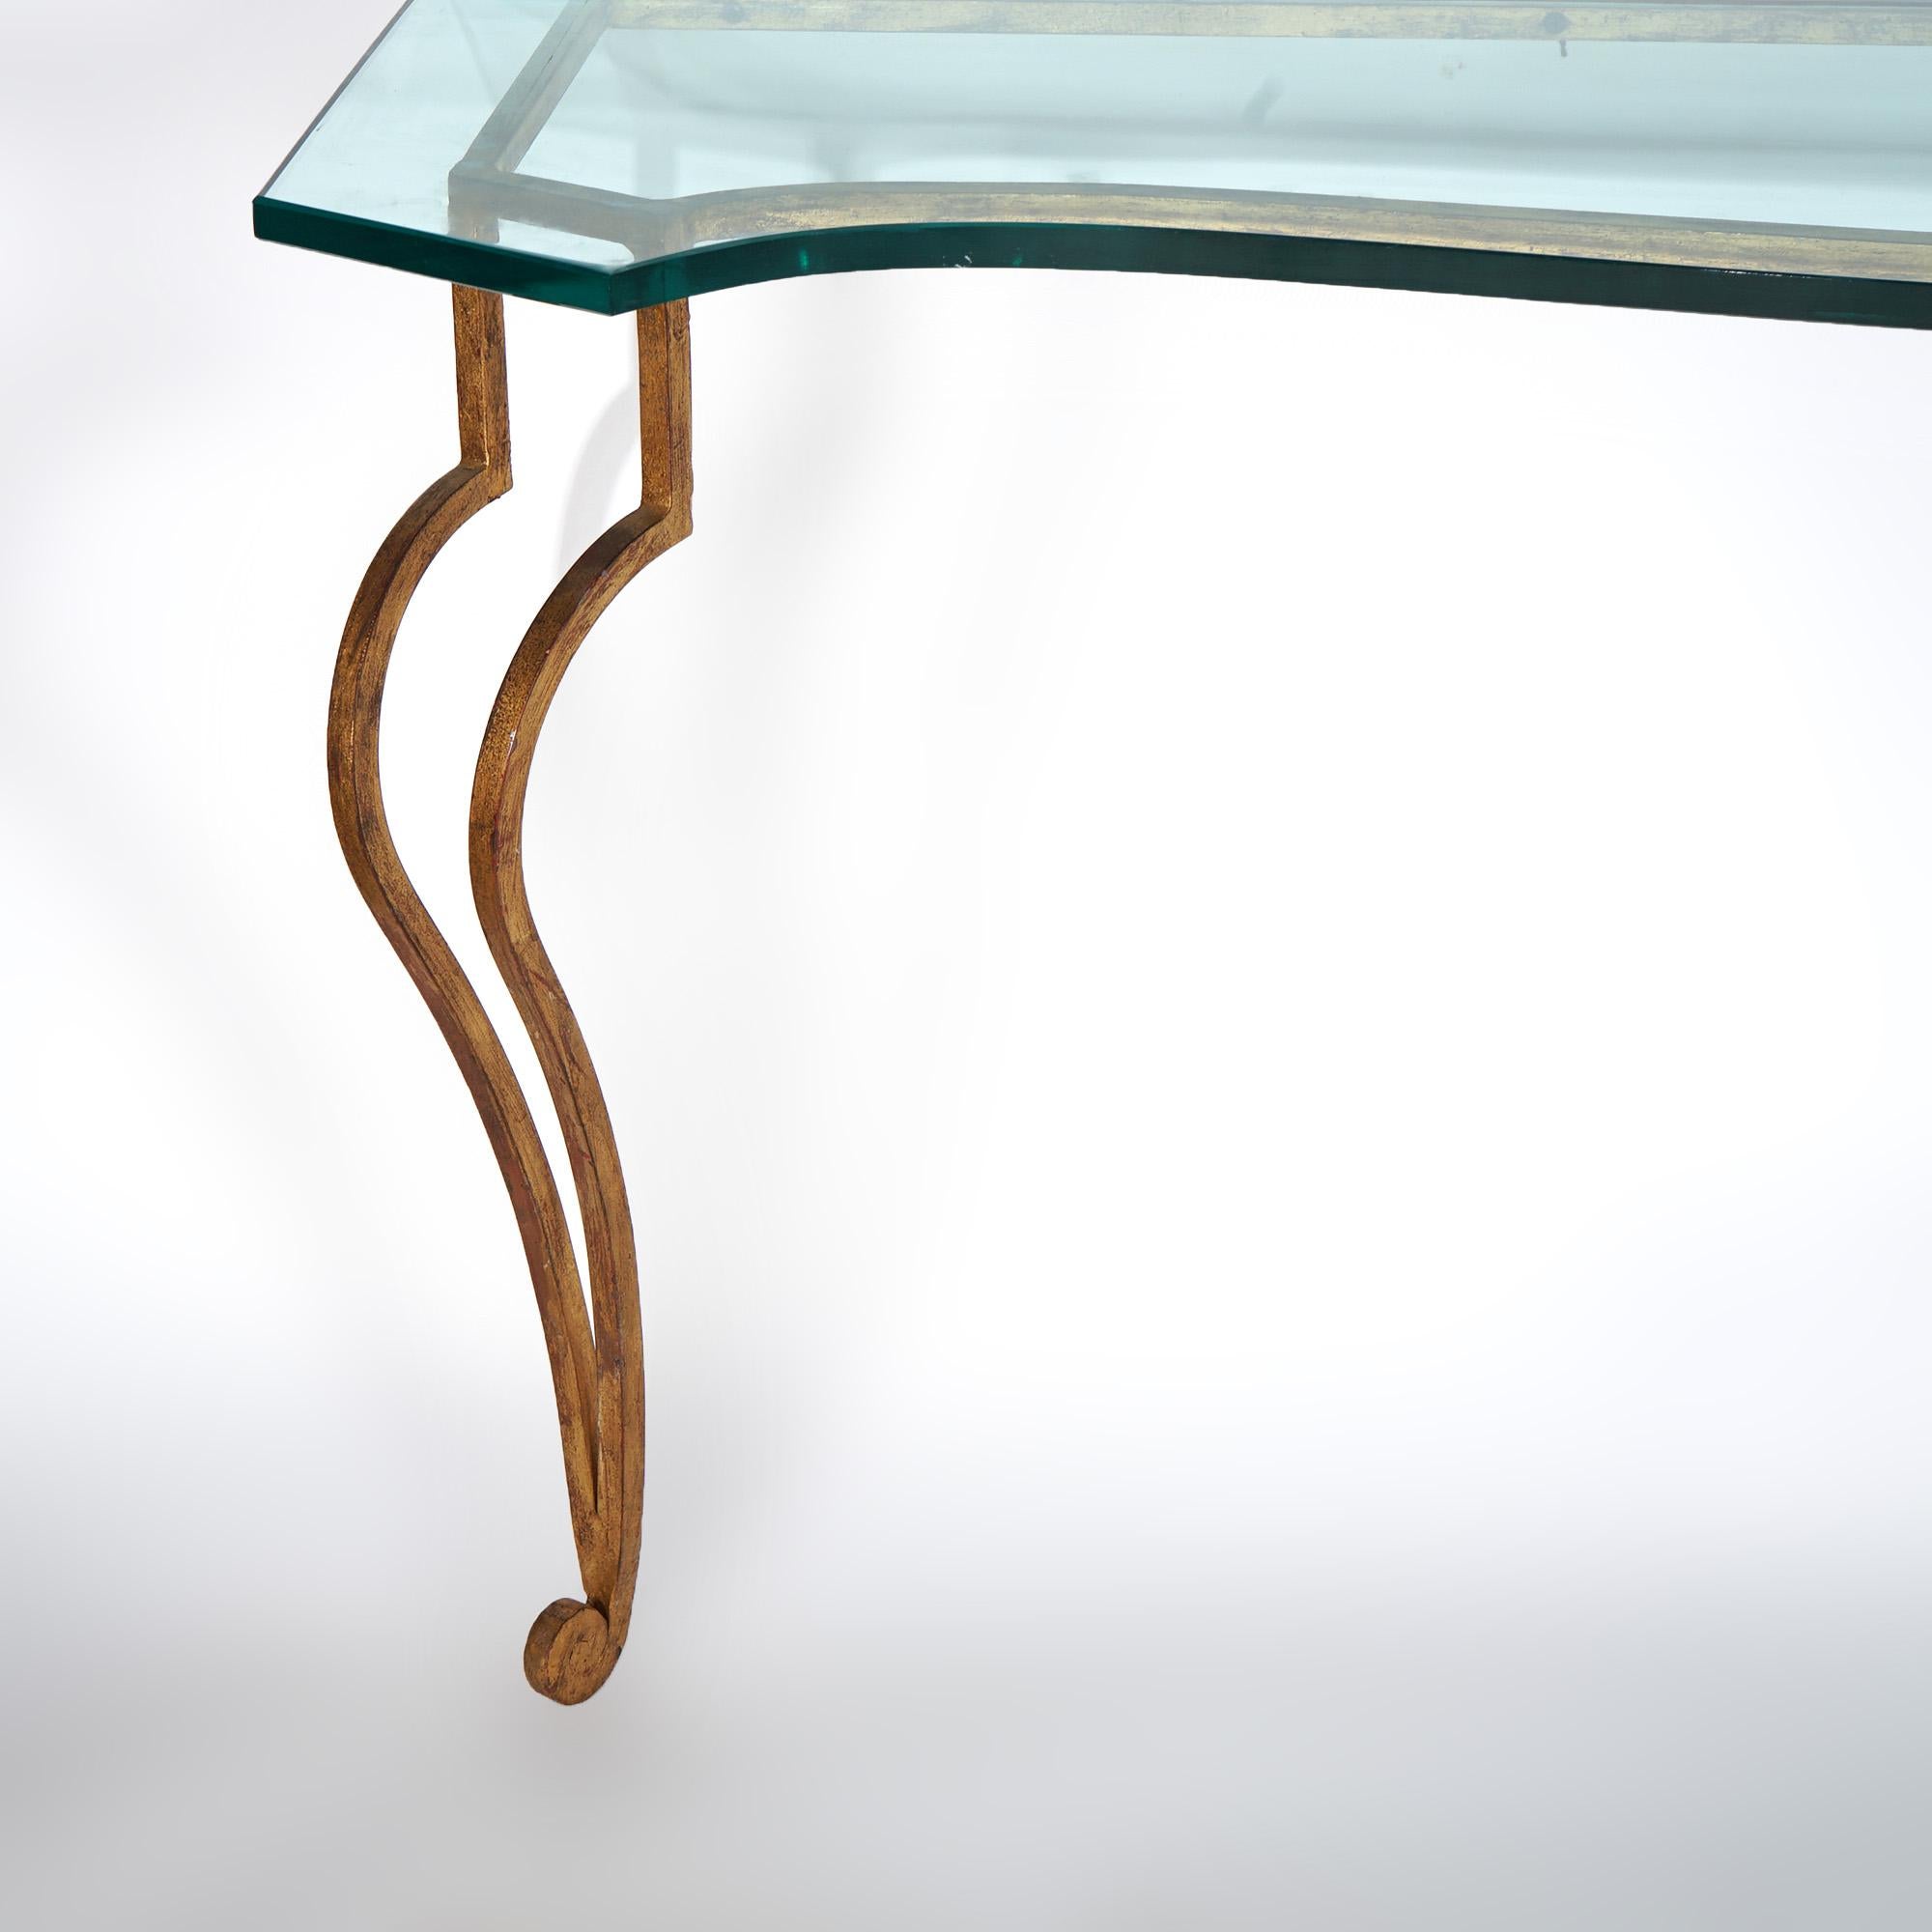 Italian Gold Gilt Wrought Iron Console Table with Glass Top 20th C For Sale 6